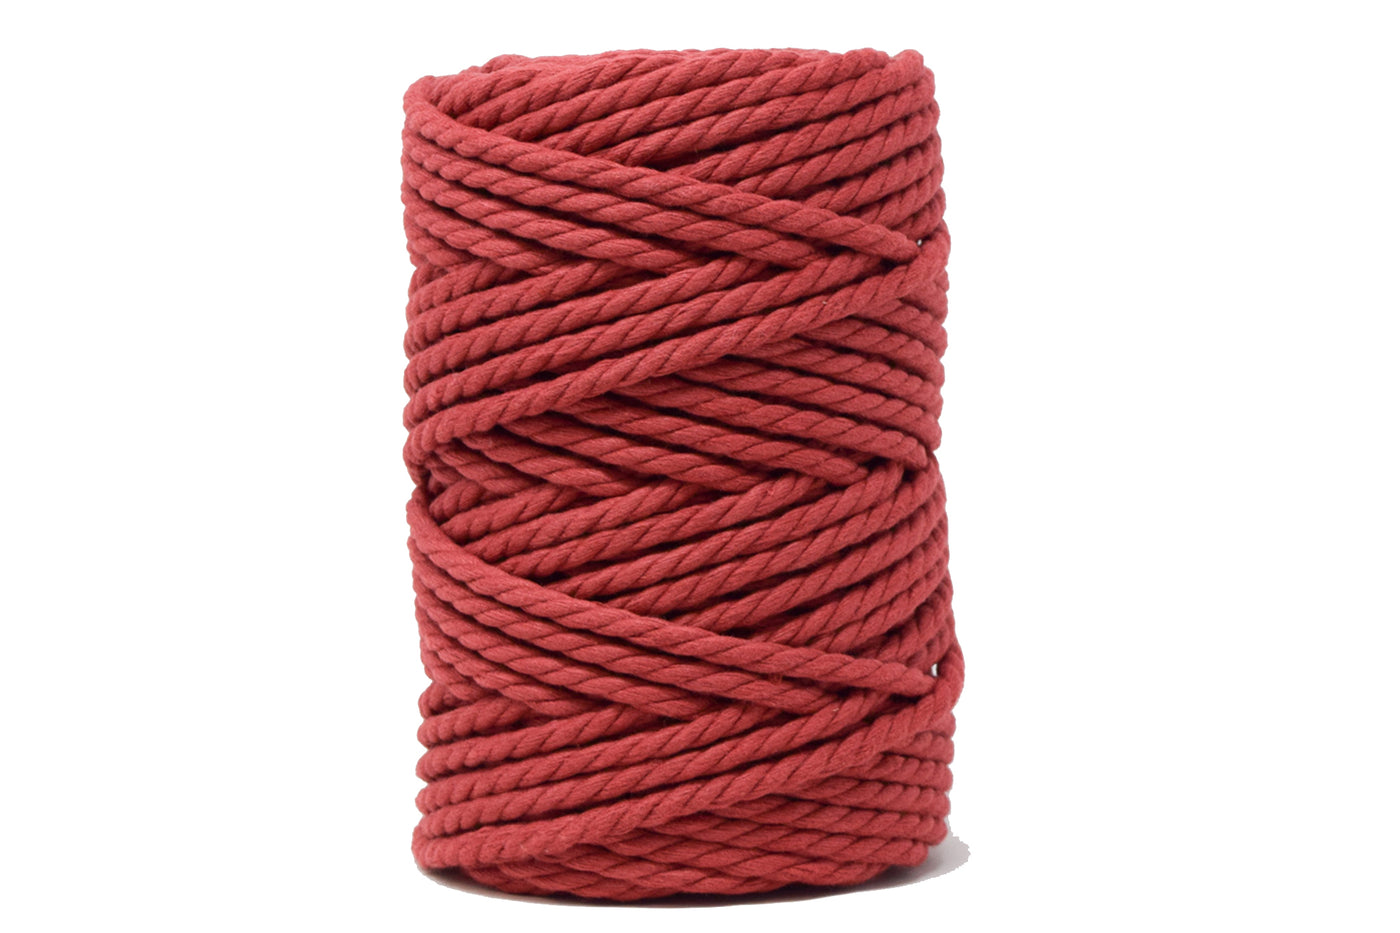 COTTON ROPE ZERO WASTE 5 MM - 3 PLY - AMOUR COLOR